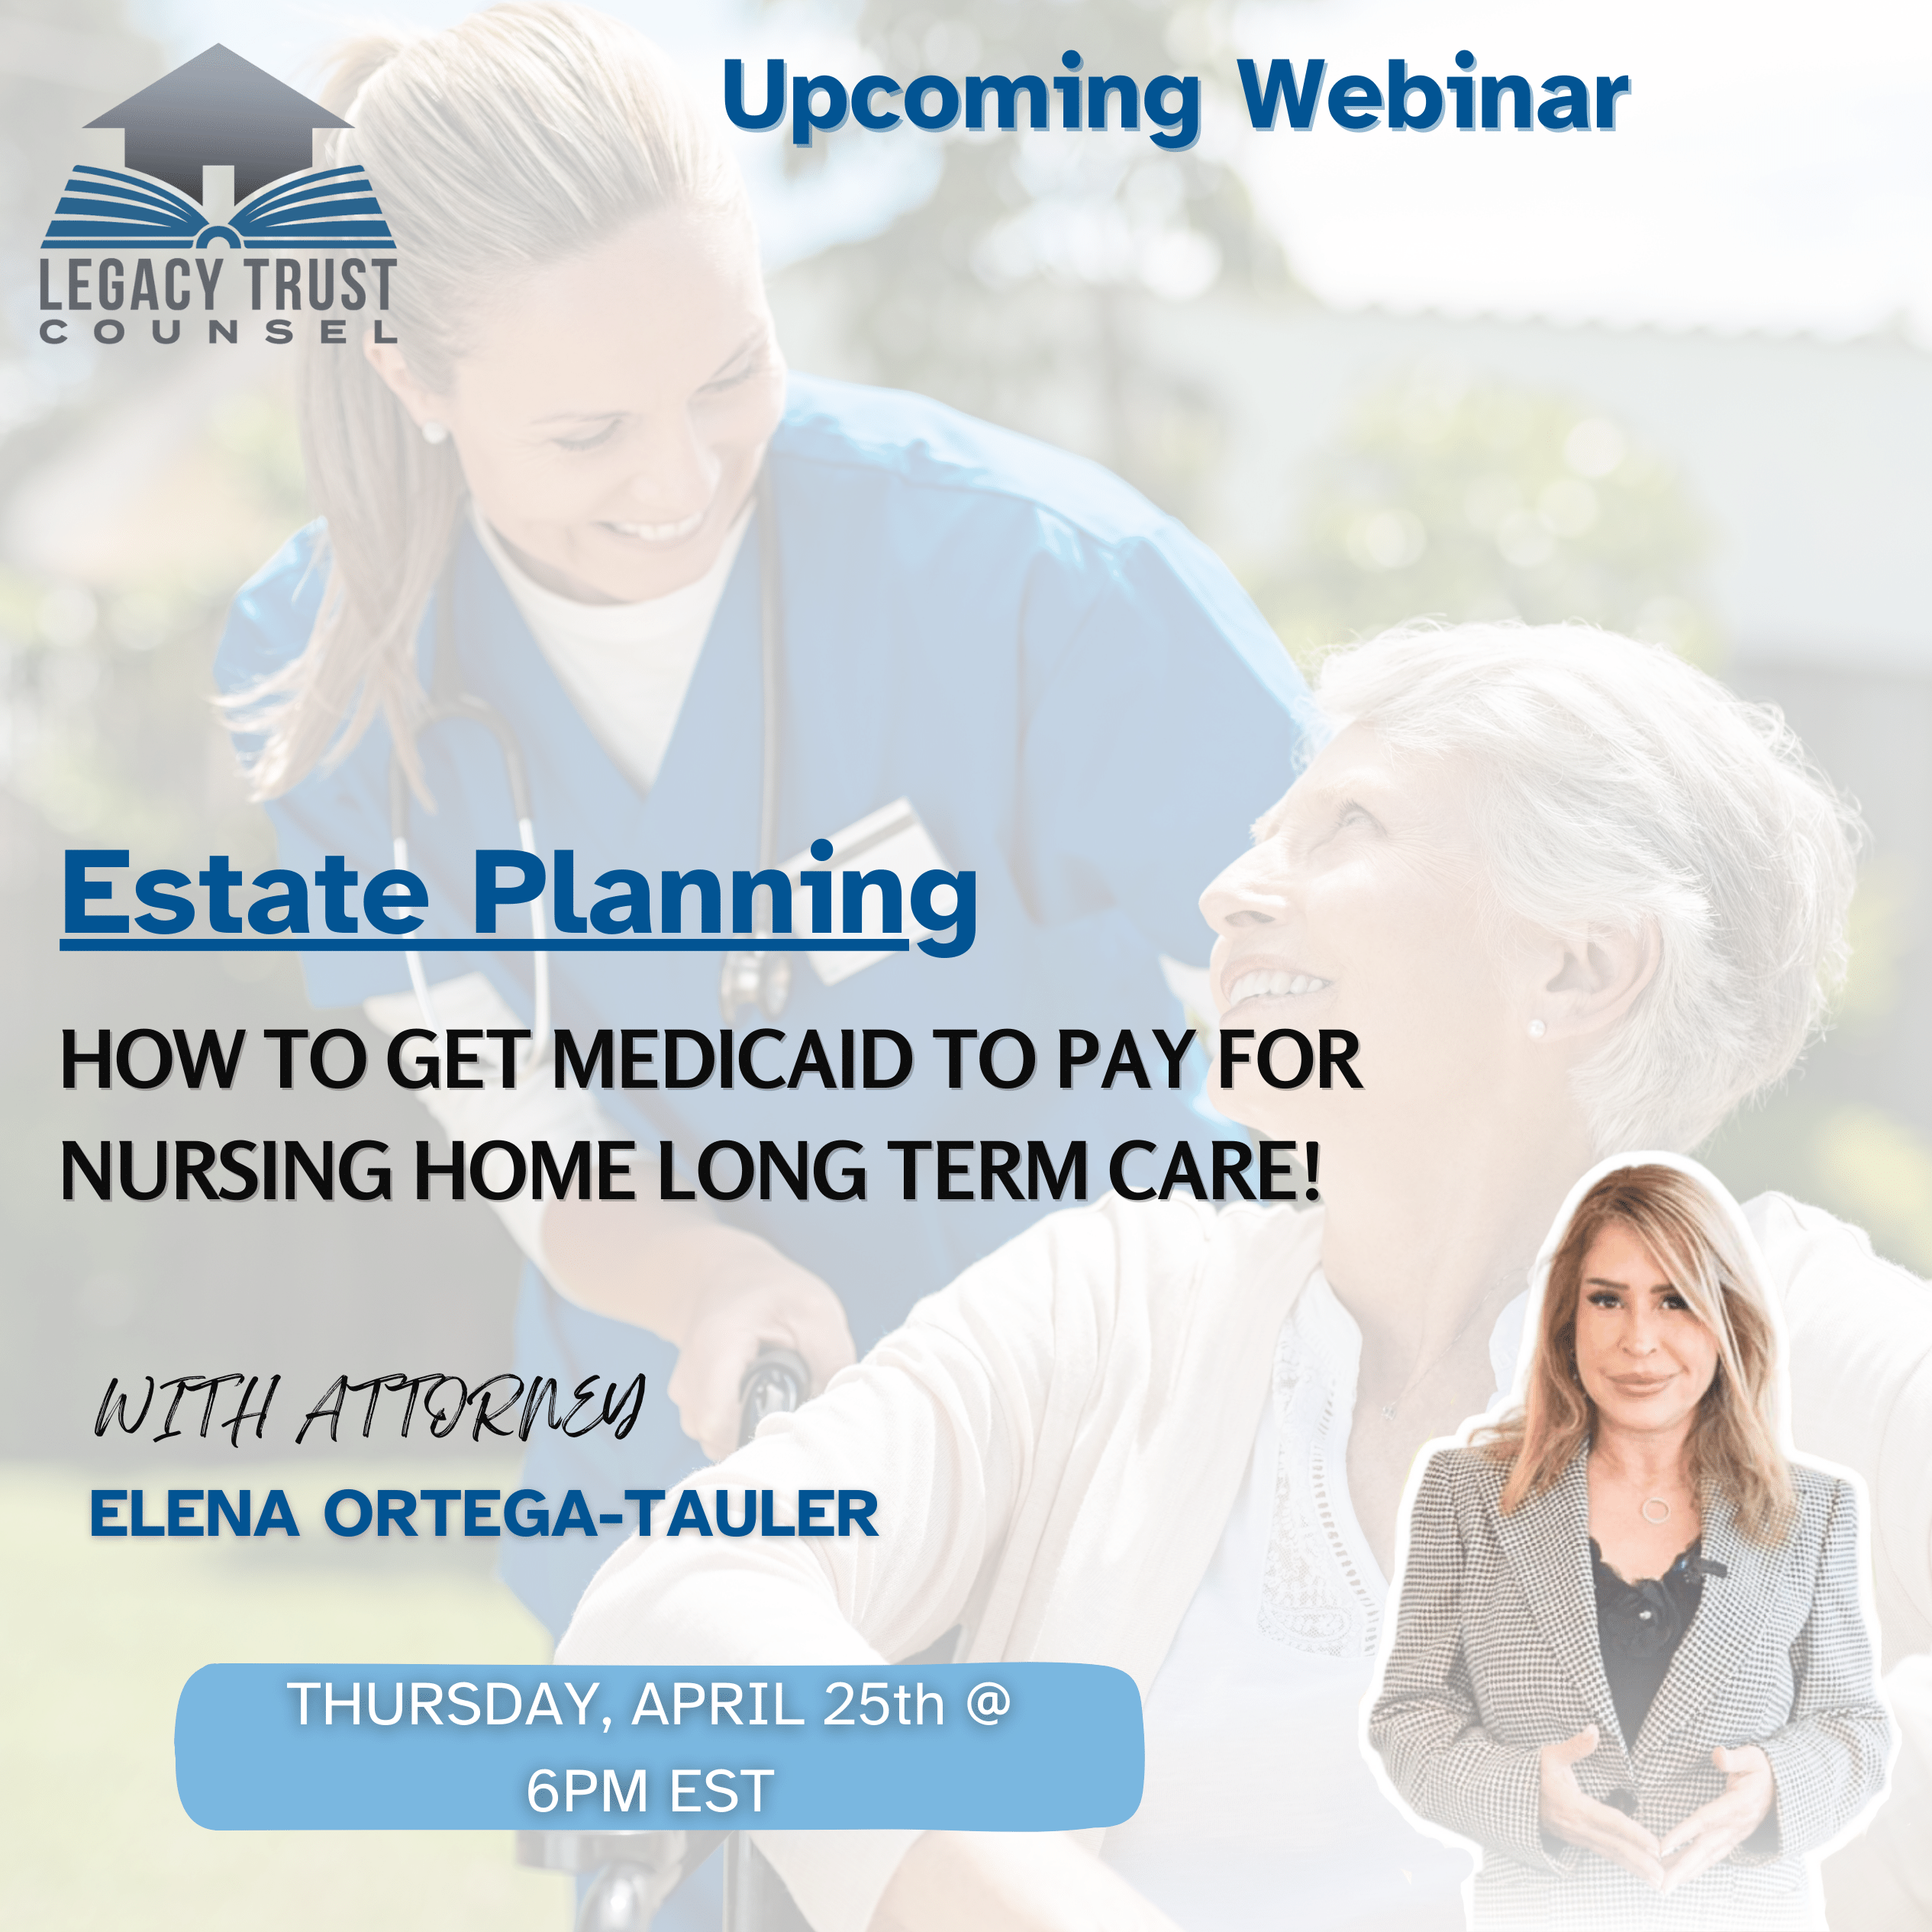 Legacy Trust Counsel ESTATE PLANNING: How To Get Medicaid To Pay For Nursing Home Long Term Care!